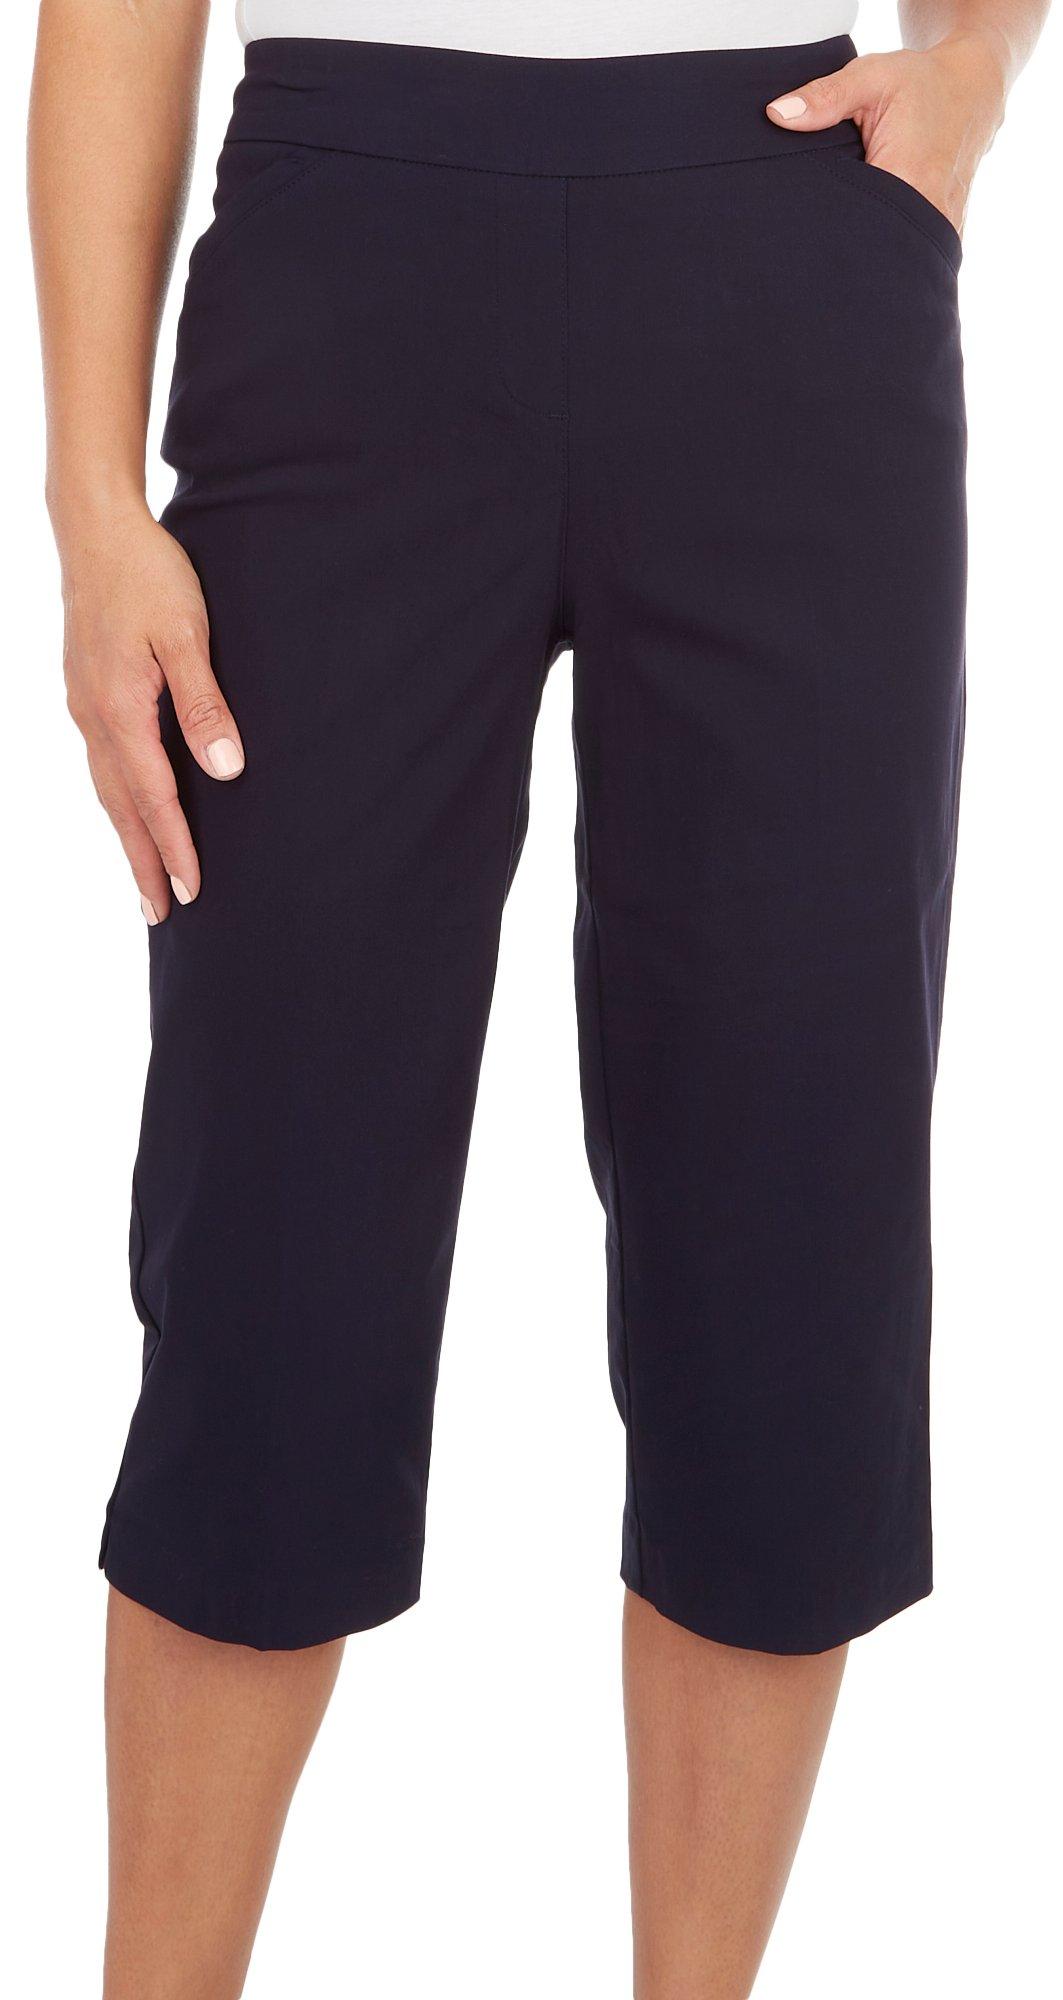 Talbots T by Womens Athletic Capri Pants Size XLP Petite Pull On 21 Inseam  - $25 - From Michelle